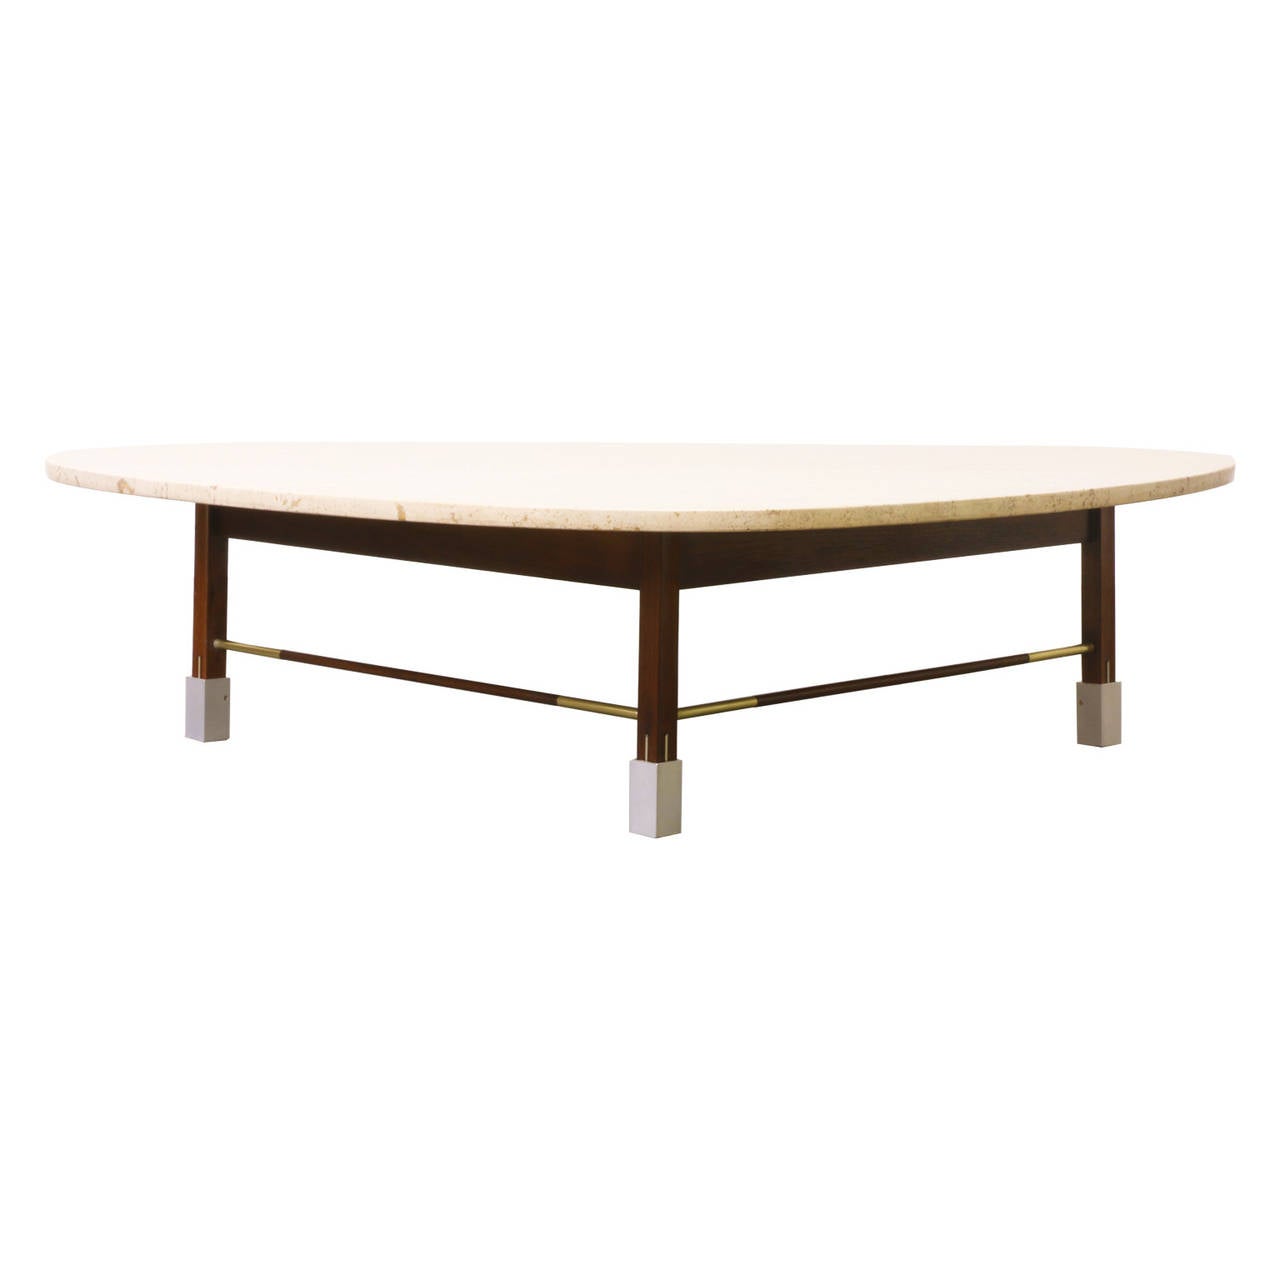 Designer: Unknown
Manufacturer: Unknown
Period/Style: Mid Century Modern
Country: United States
Date: 1960’s

Dimensions: 13.75″H x 56″W x 39.5″D
Materials: Travertine Marble, Walnut, Aluminum, Brass
Condition: Excellent – Minor Wear
Number